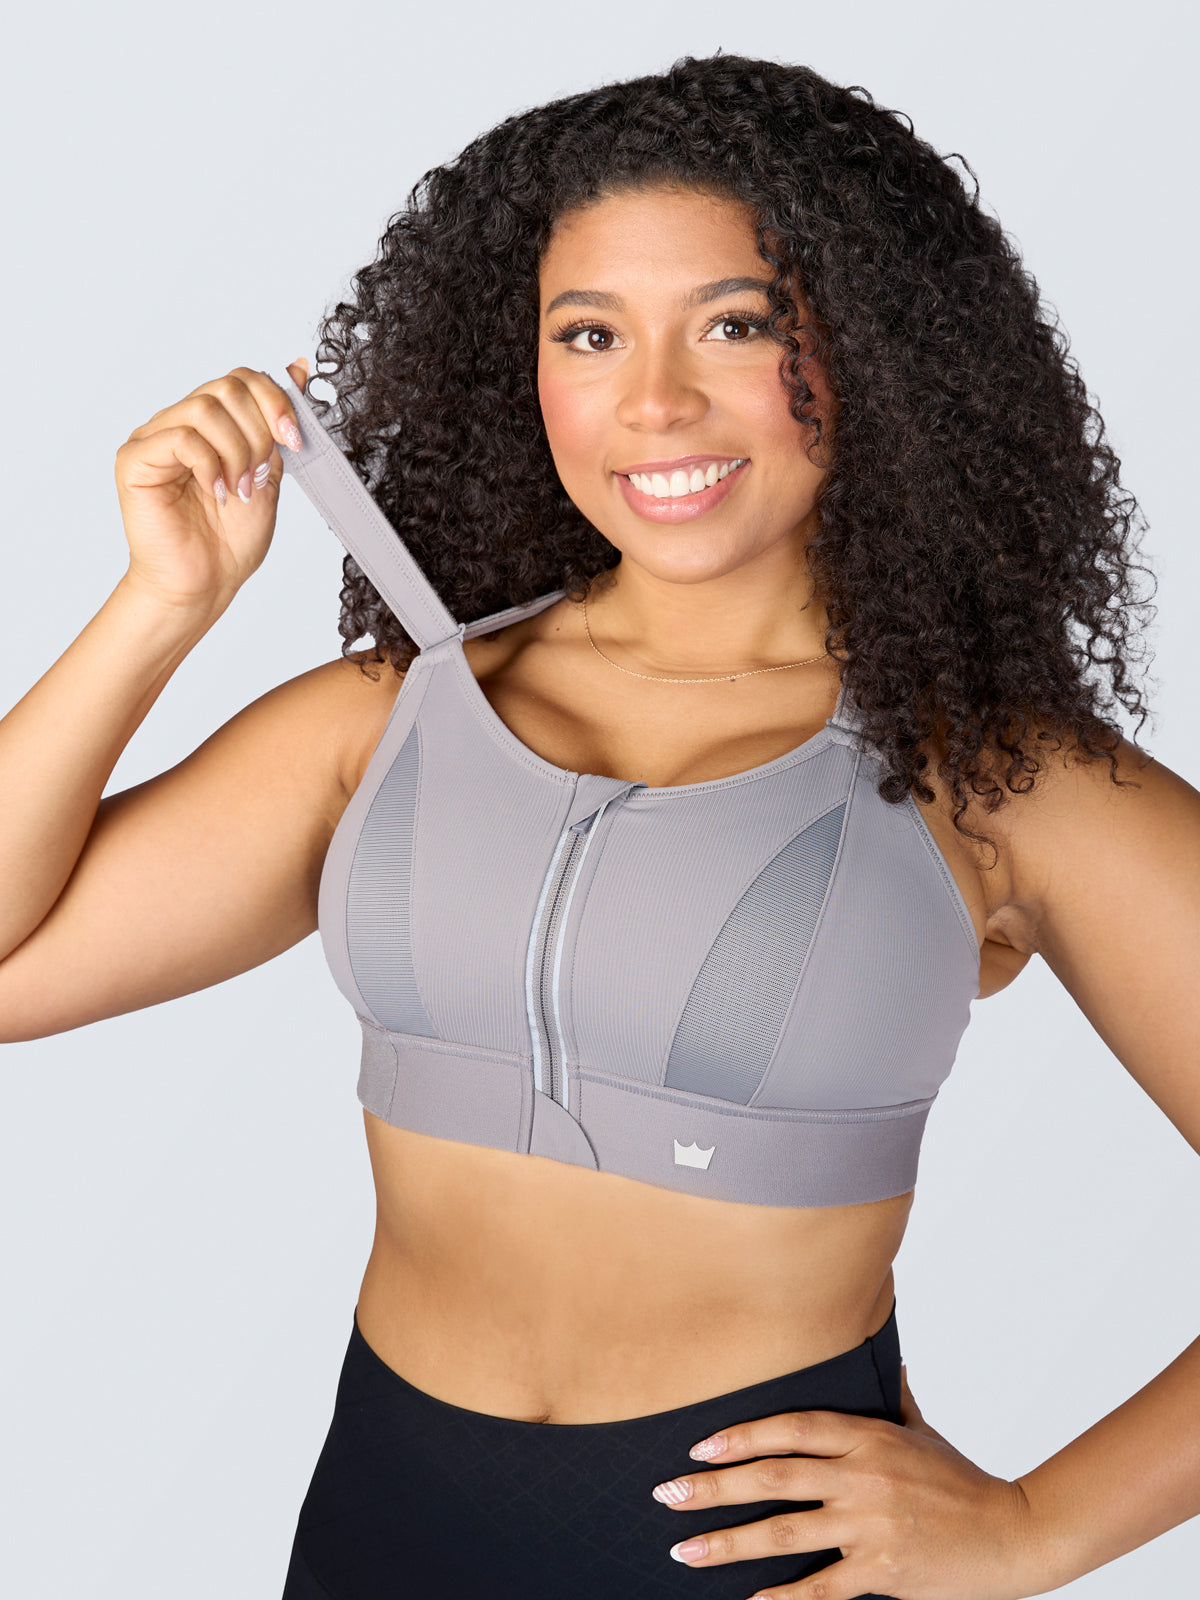 ADJUSTABLE SPORTS BRA, AS SEEN ON ABC'S SHARK TANK The Shefit Ultimate Sports  Bra empowers all women regardless of age, athlet…